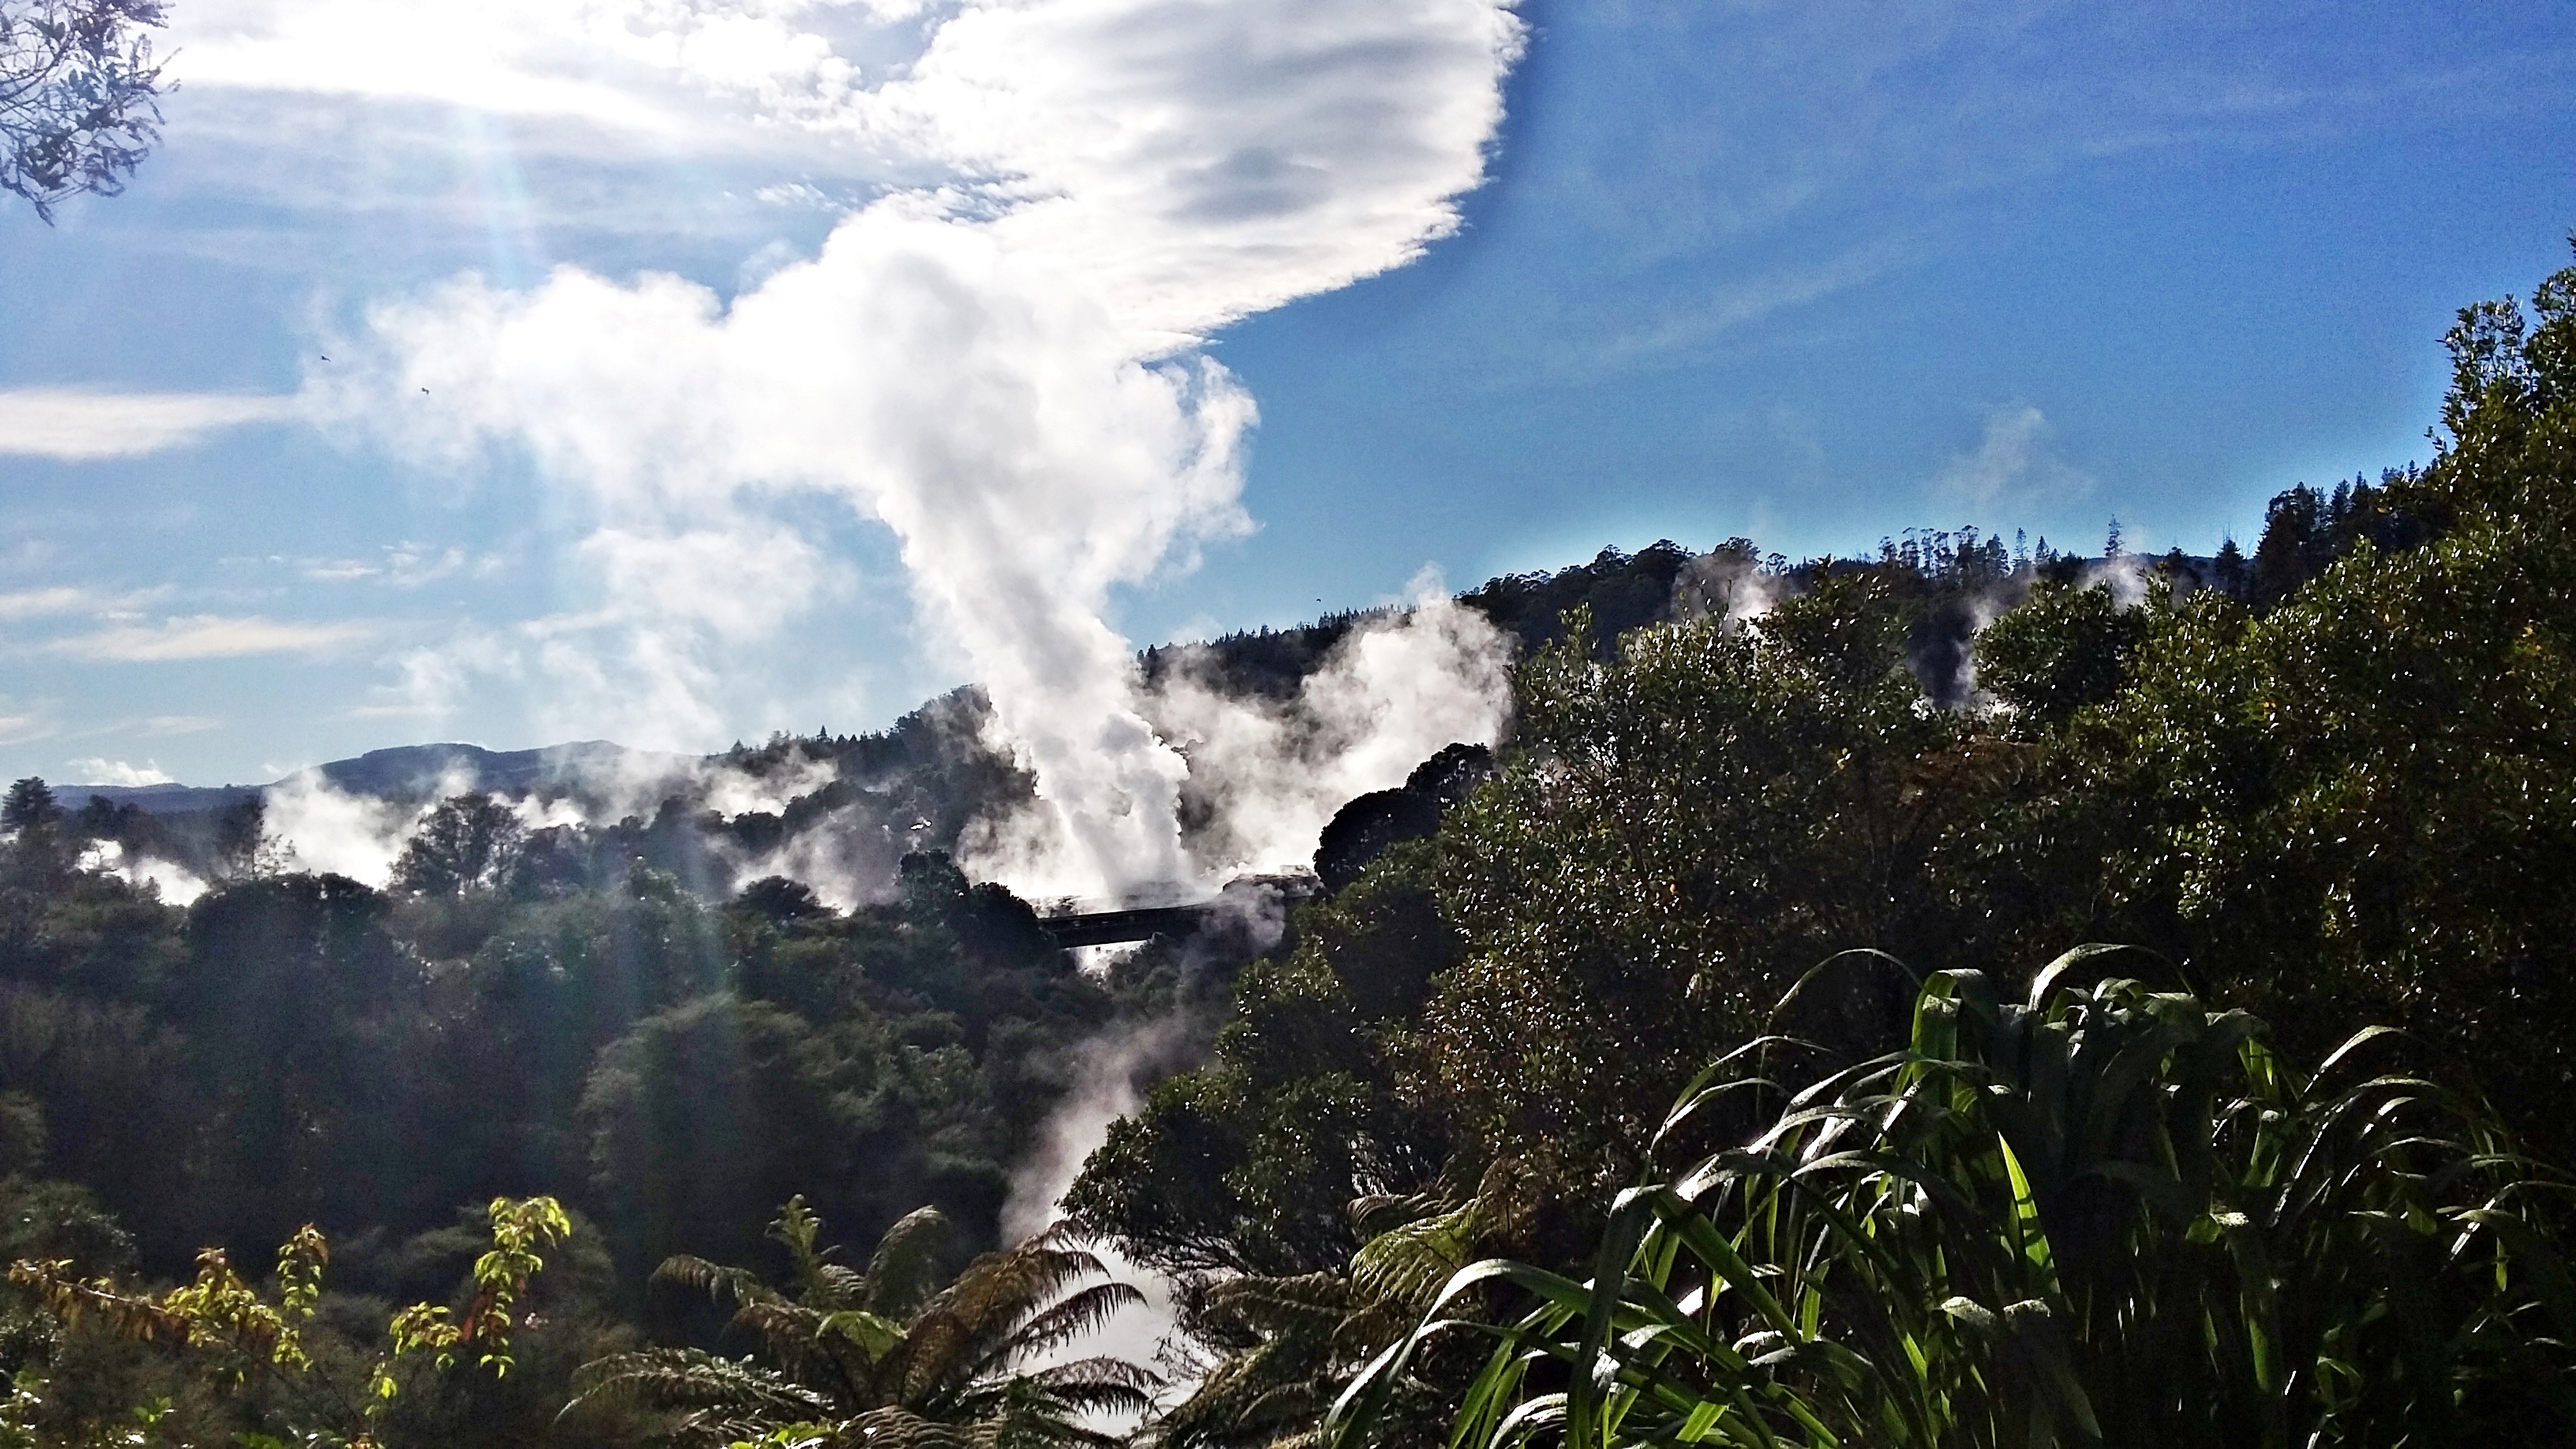 The Te Puia Pohutu Geyser erupting right in front of our eyes